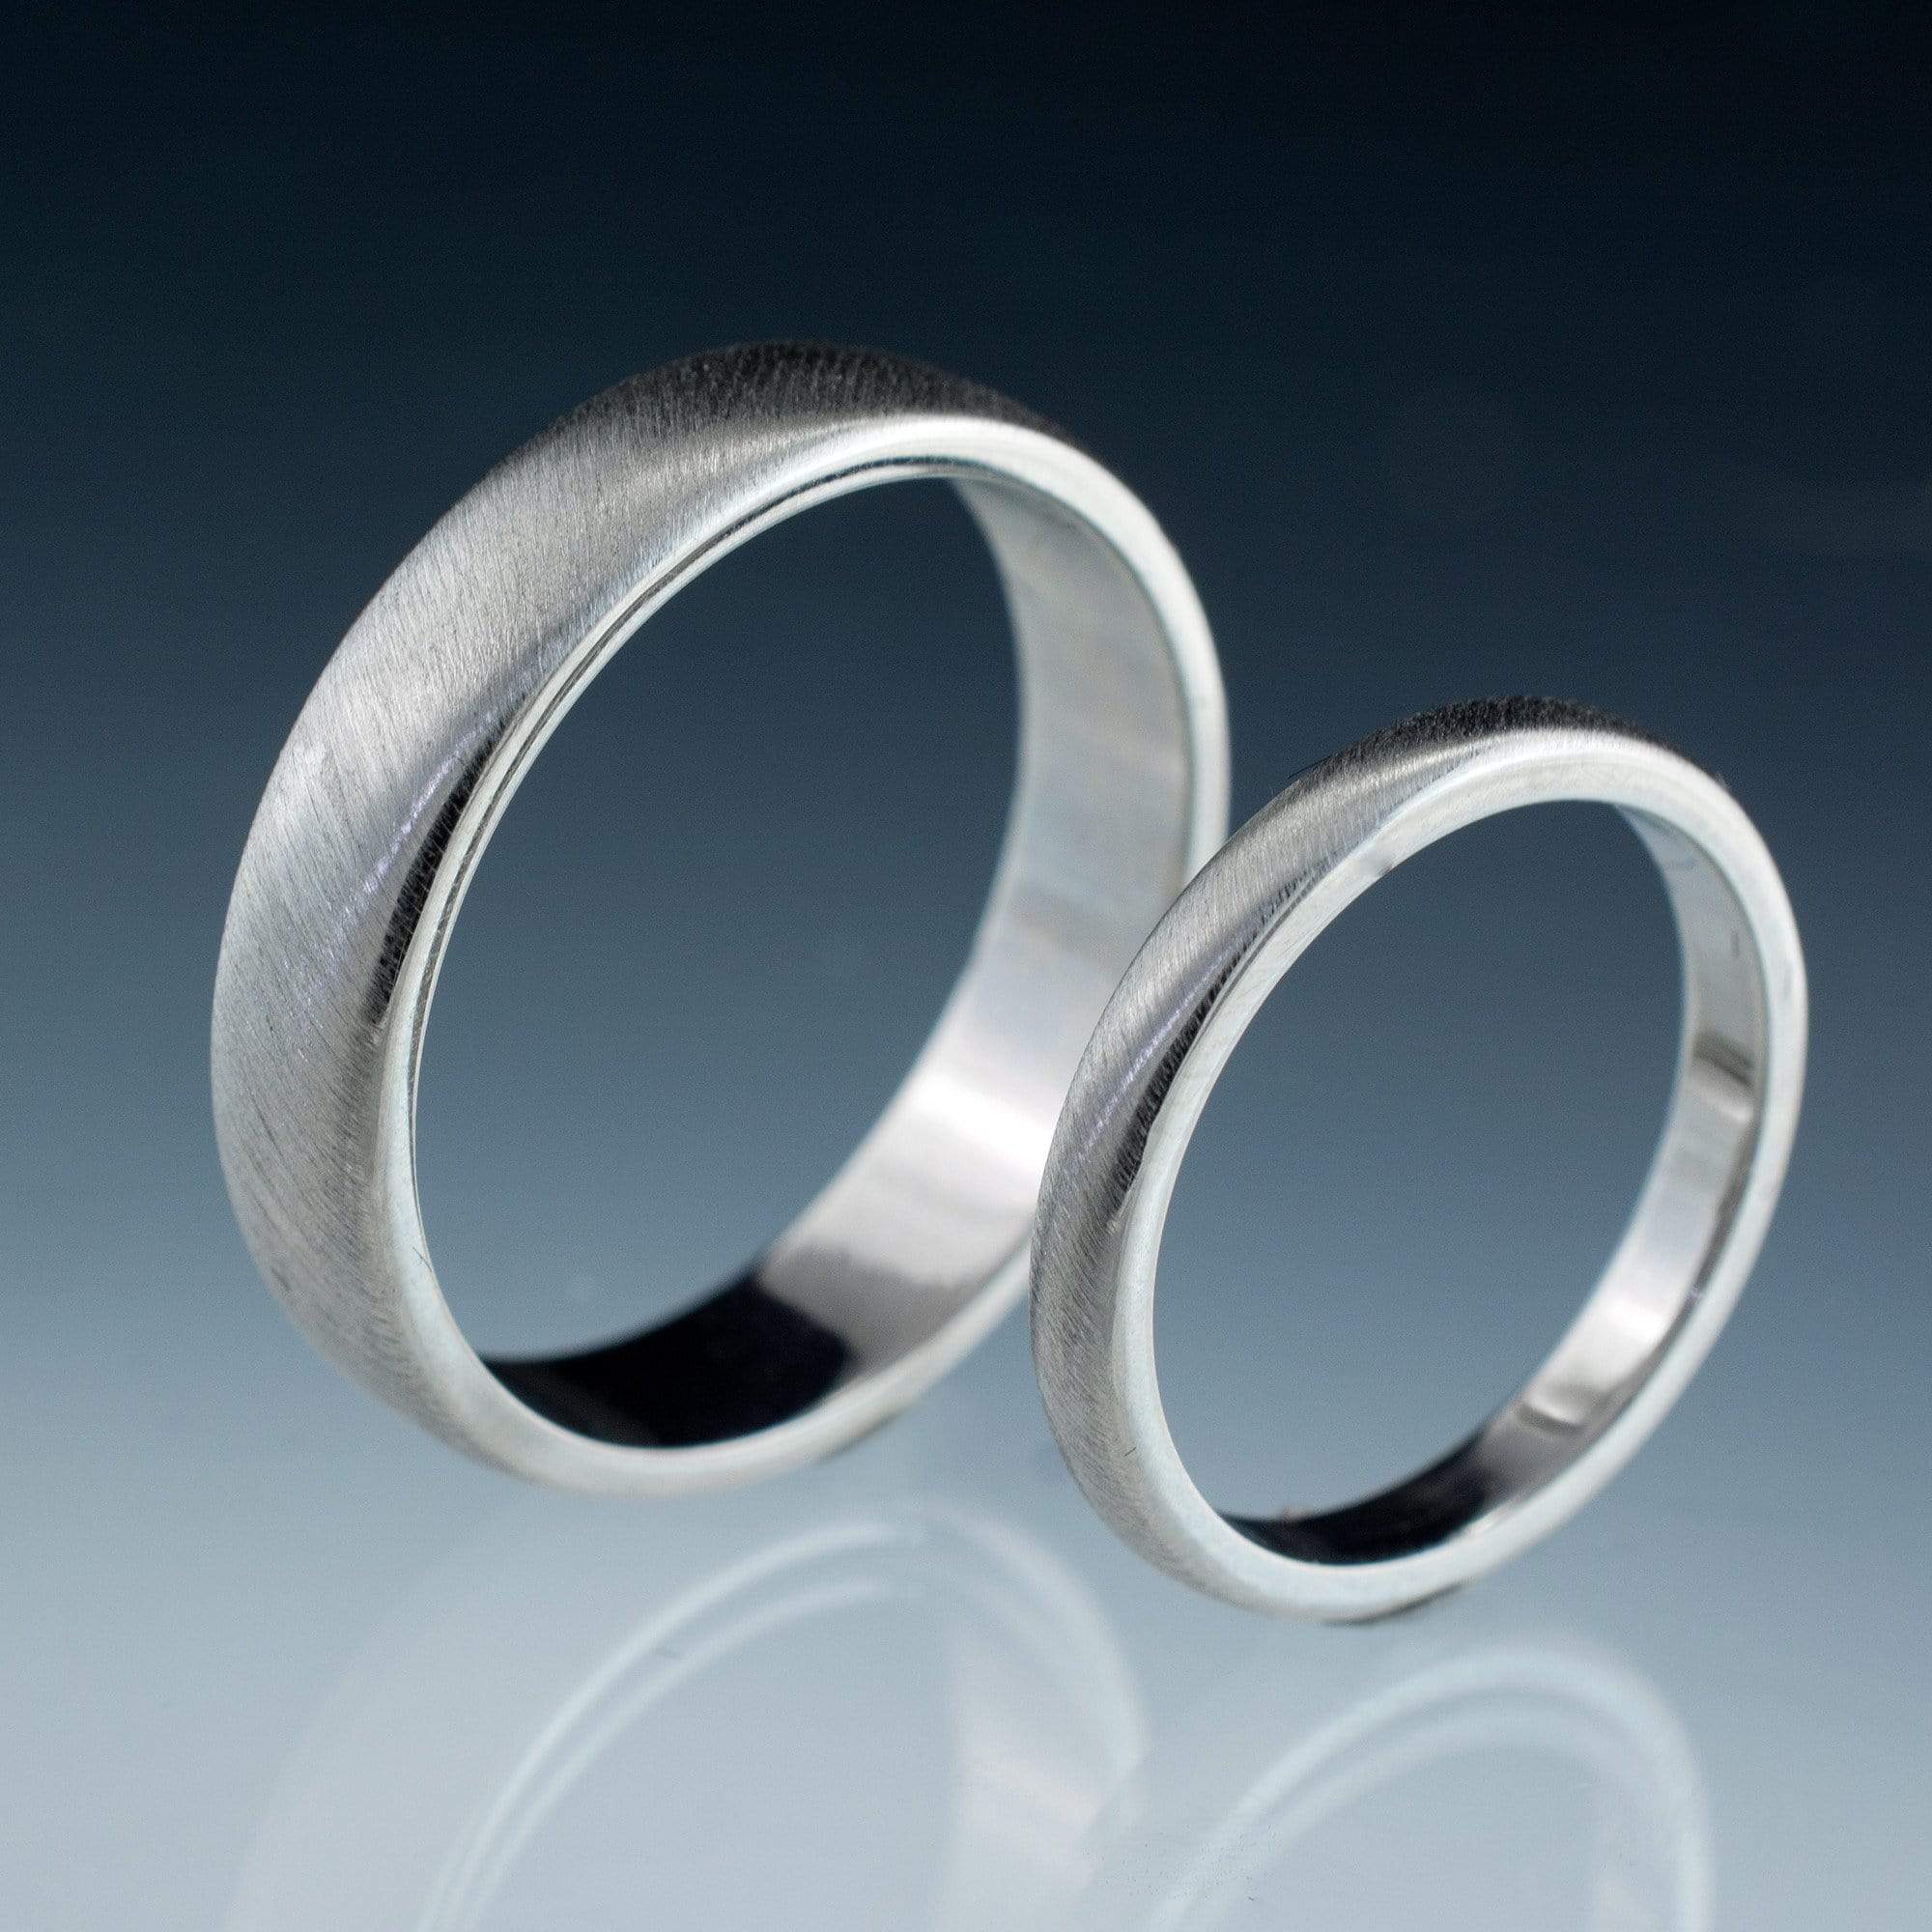 Simple Domed Wedding Bands, Set of 2 Wedding Rings